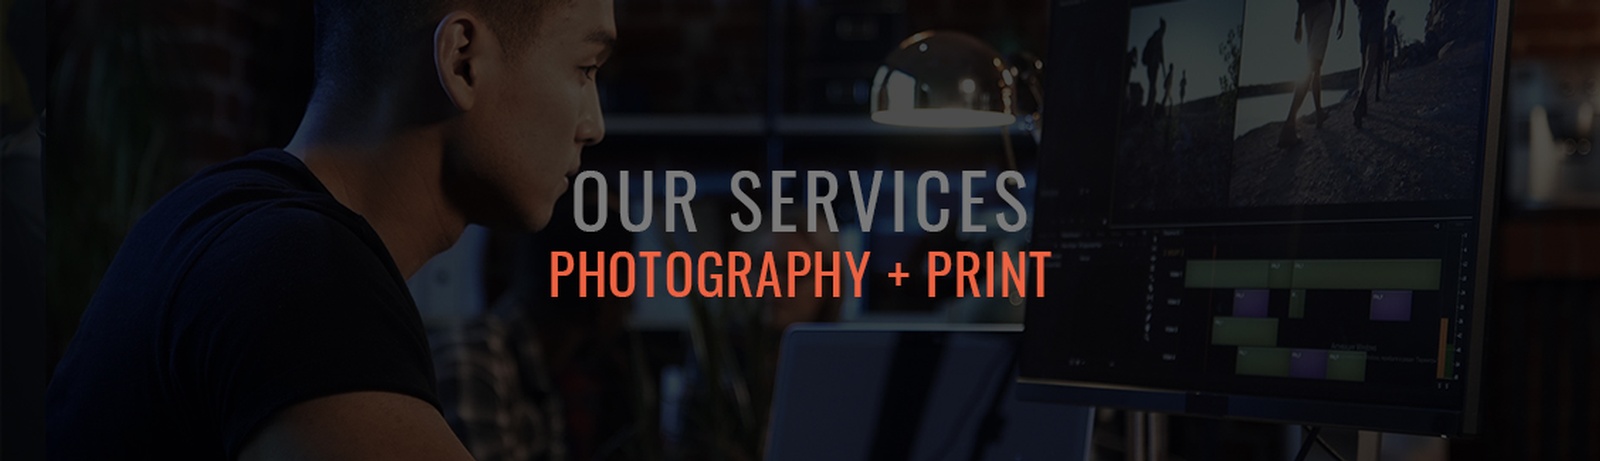 Photography + Print Services by Hurst Digital